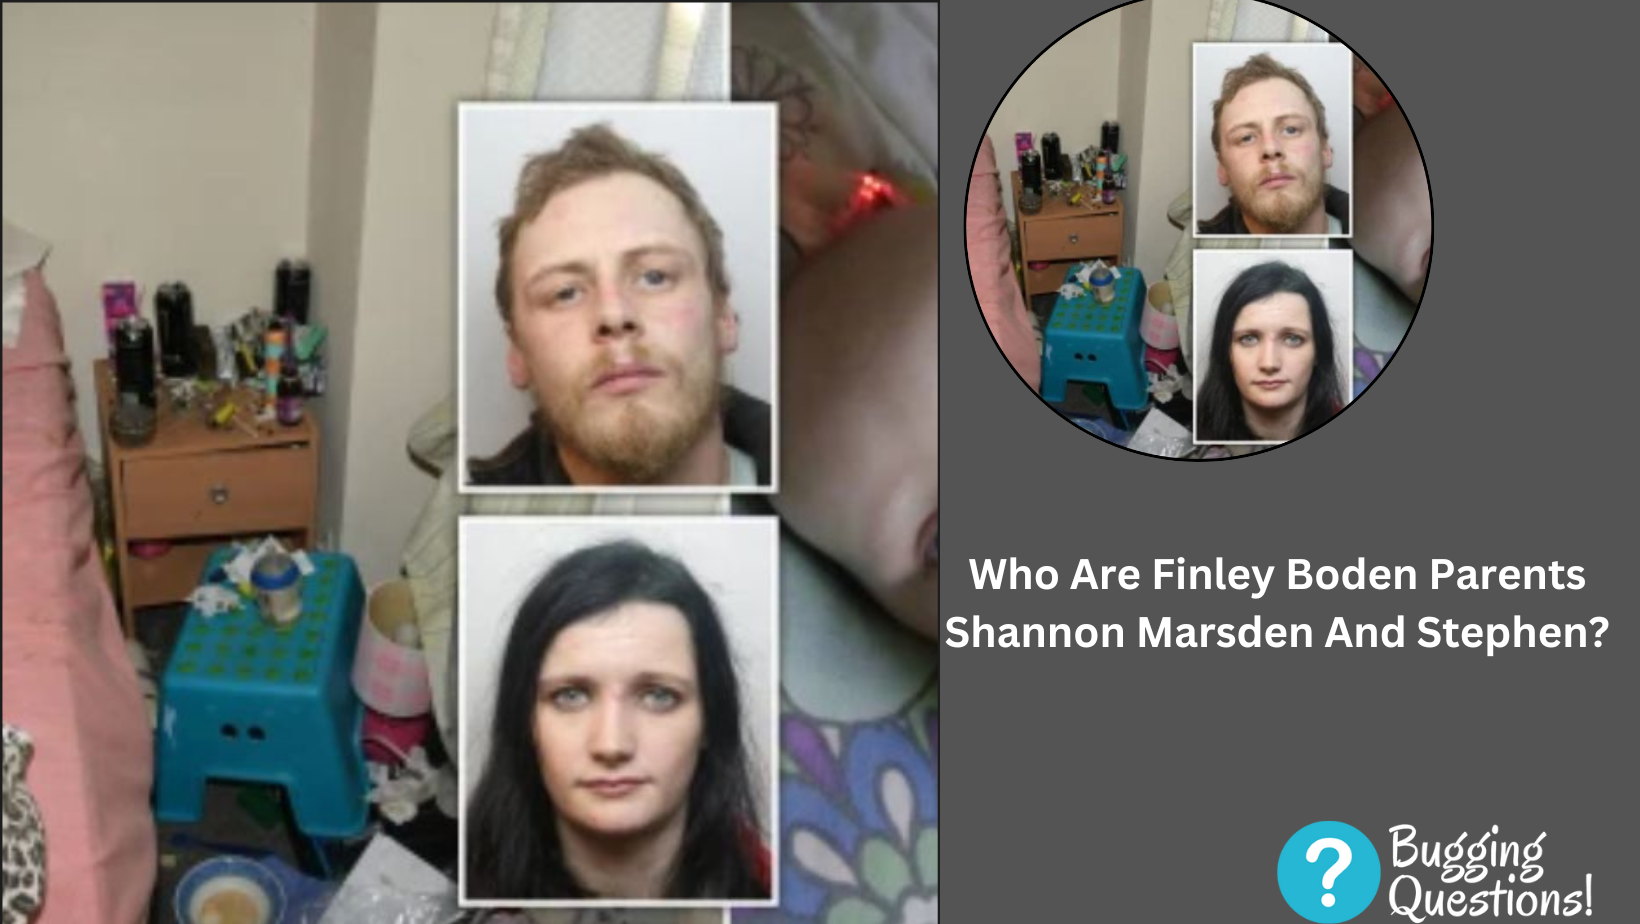 Who Are Finley Boden Parents Shannon Marsden And Stephen?